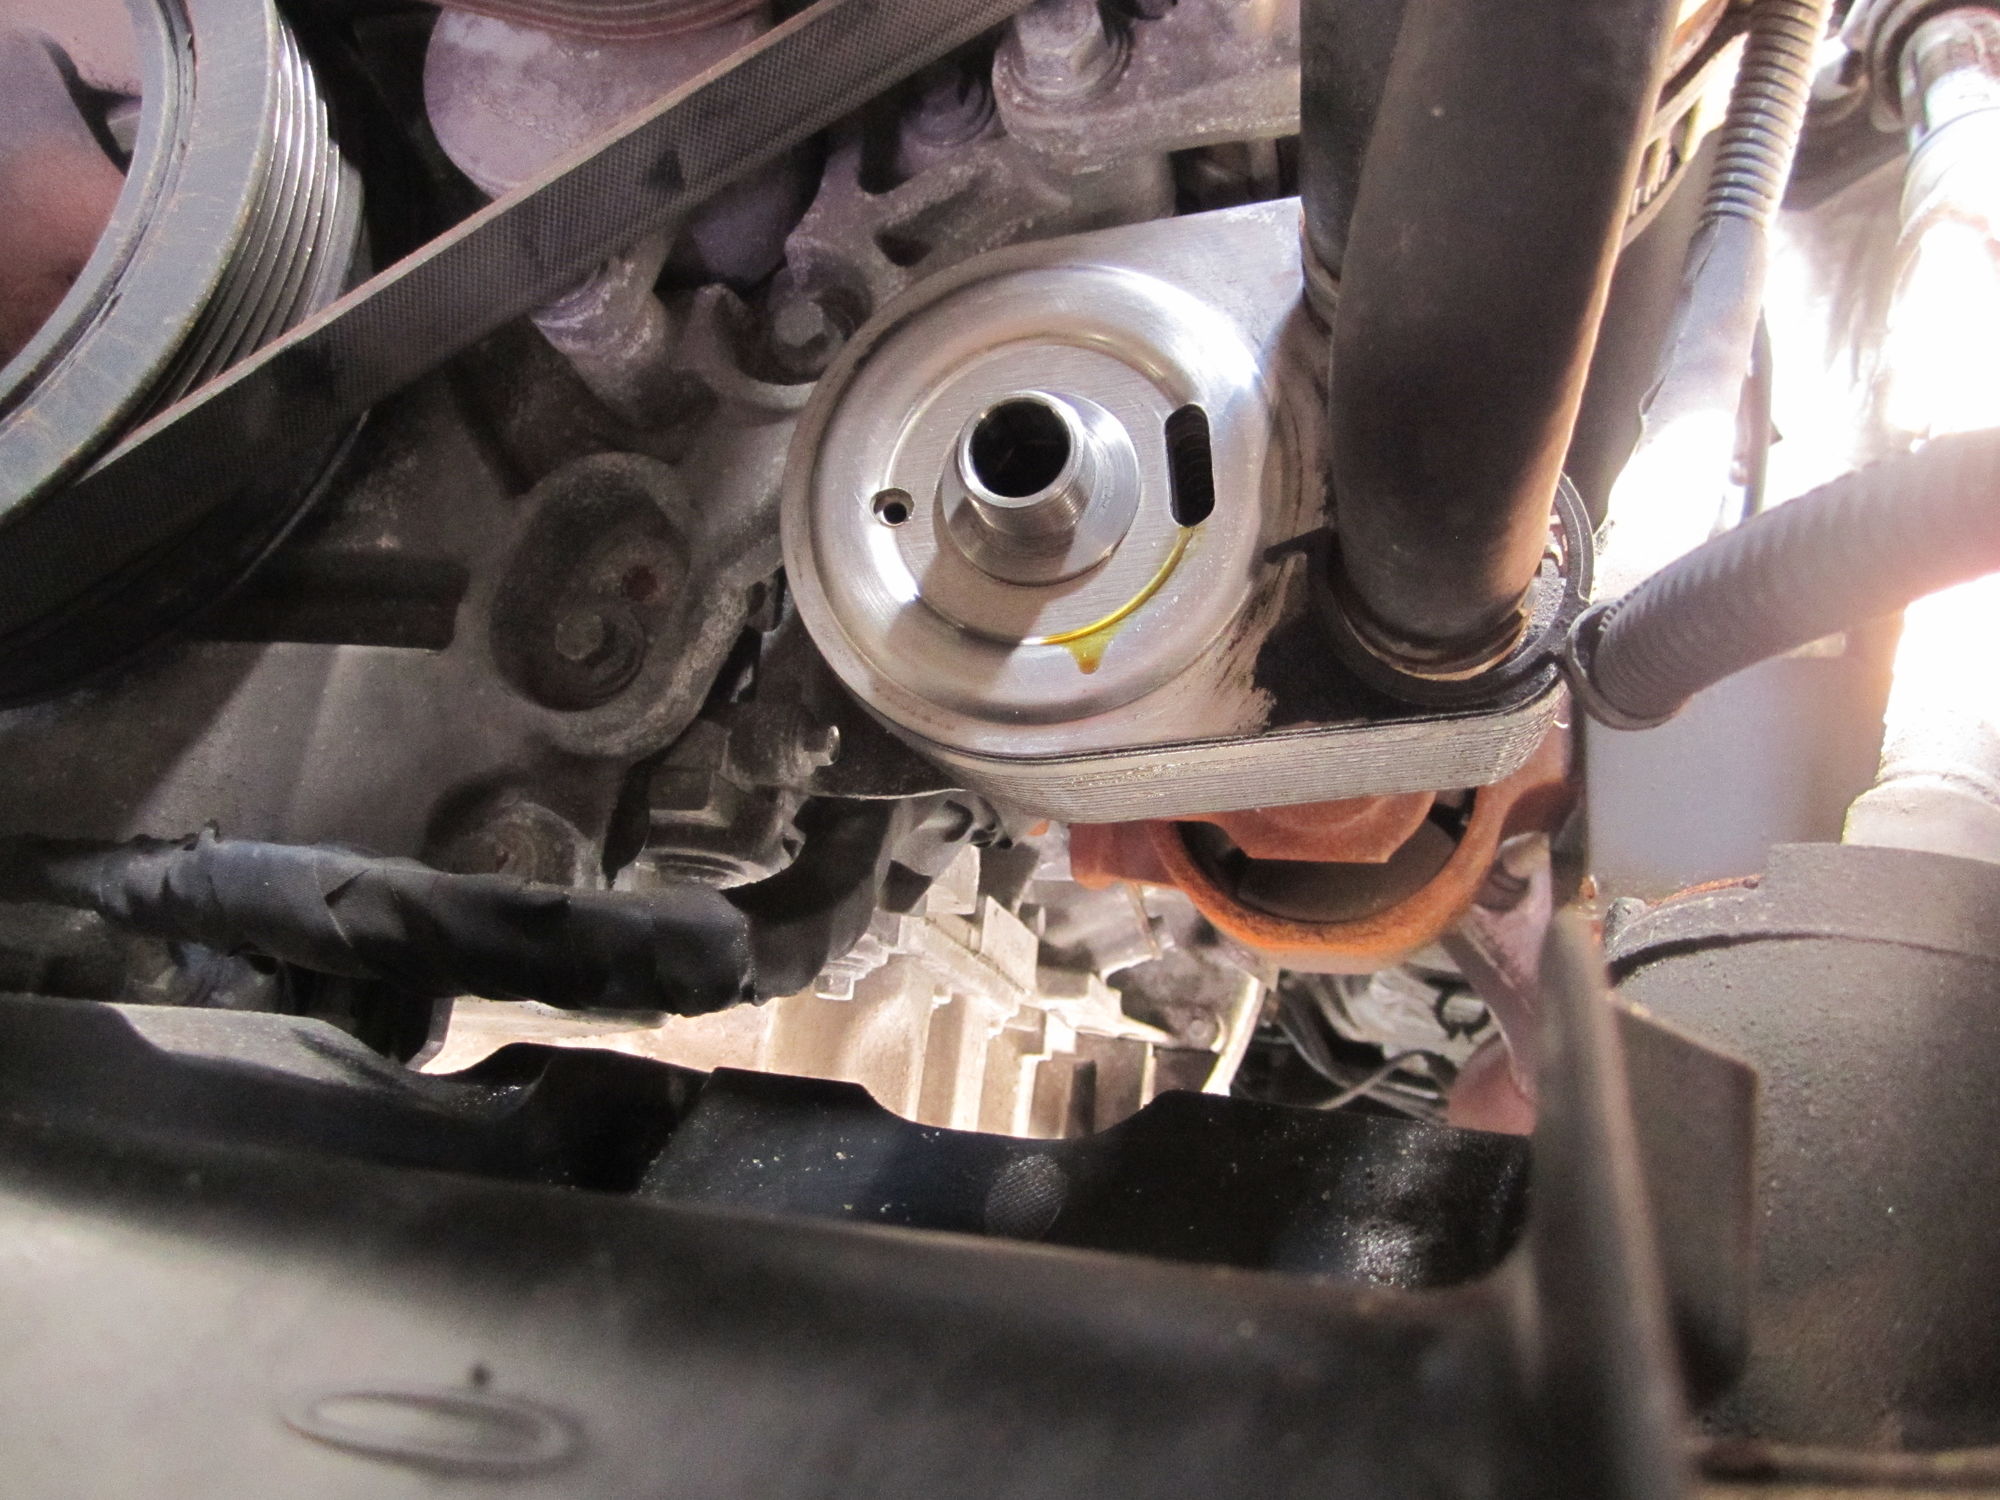 Oil filter Relocation - Page 2 - Ford F150 Forum - Community of Ford Truck Fans 2011 Ford F150 3.5 Oil Filter Location